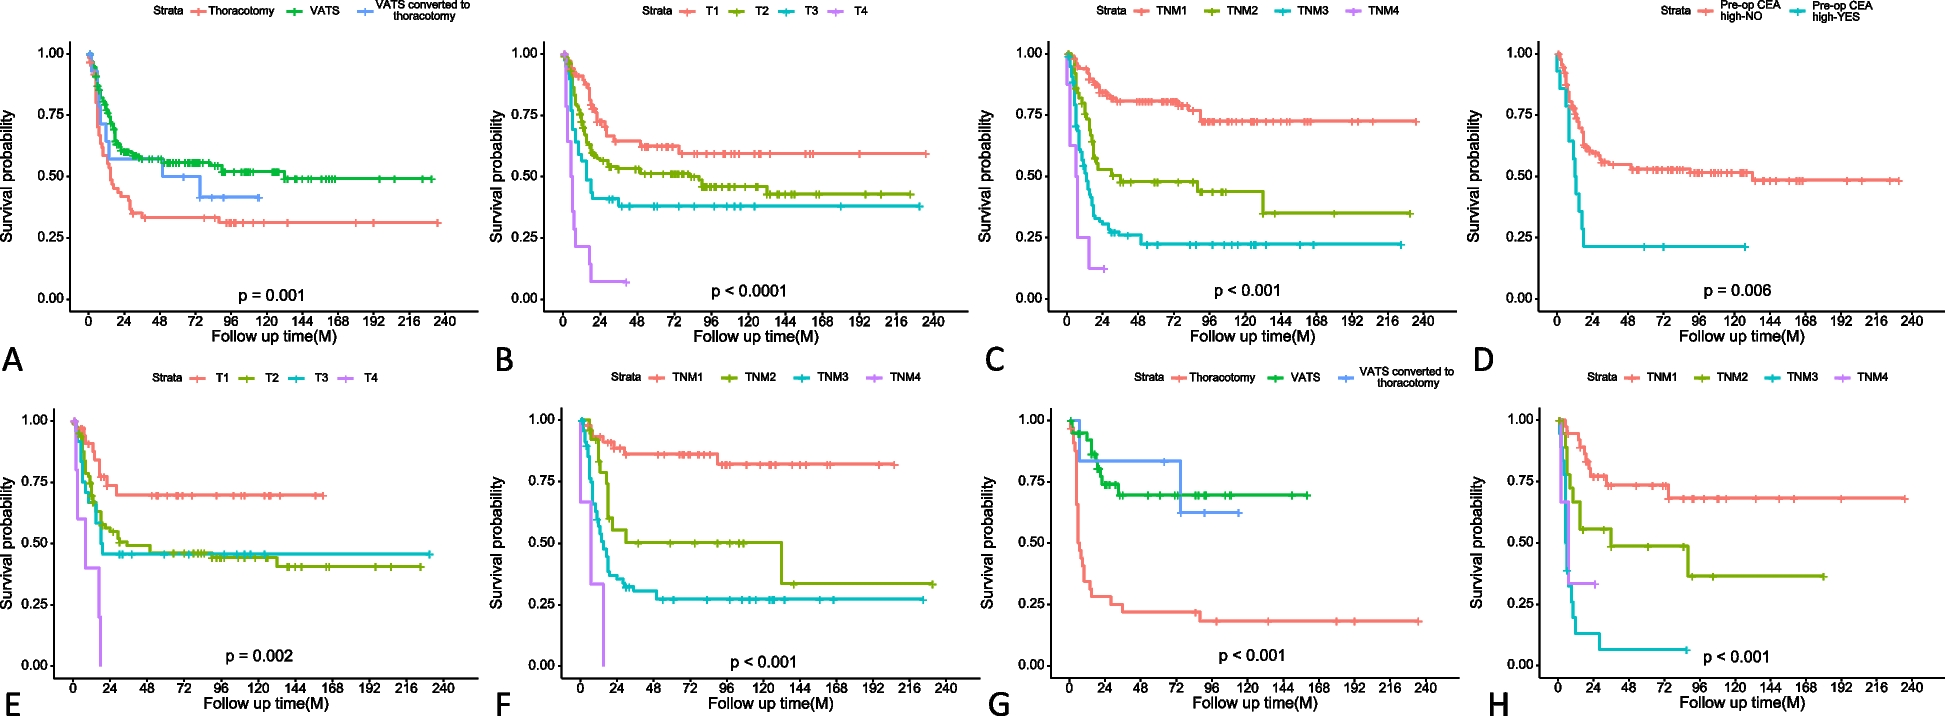 Prognostic factors and nomogram for pulmonary resected high-grade neuroendocrine carcinomas: a 20-year single institutional real-world experience